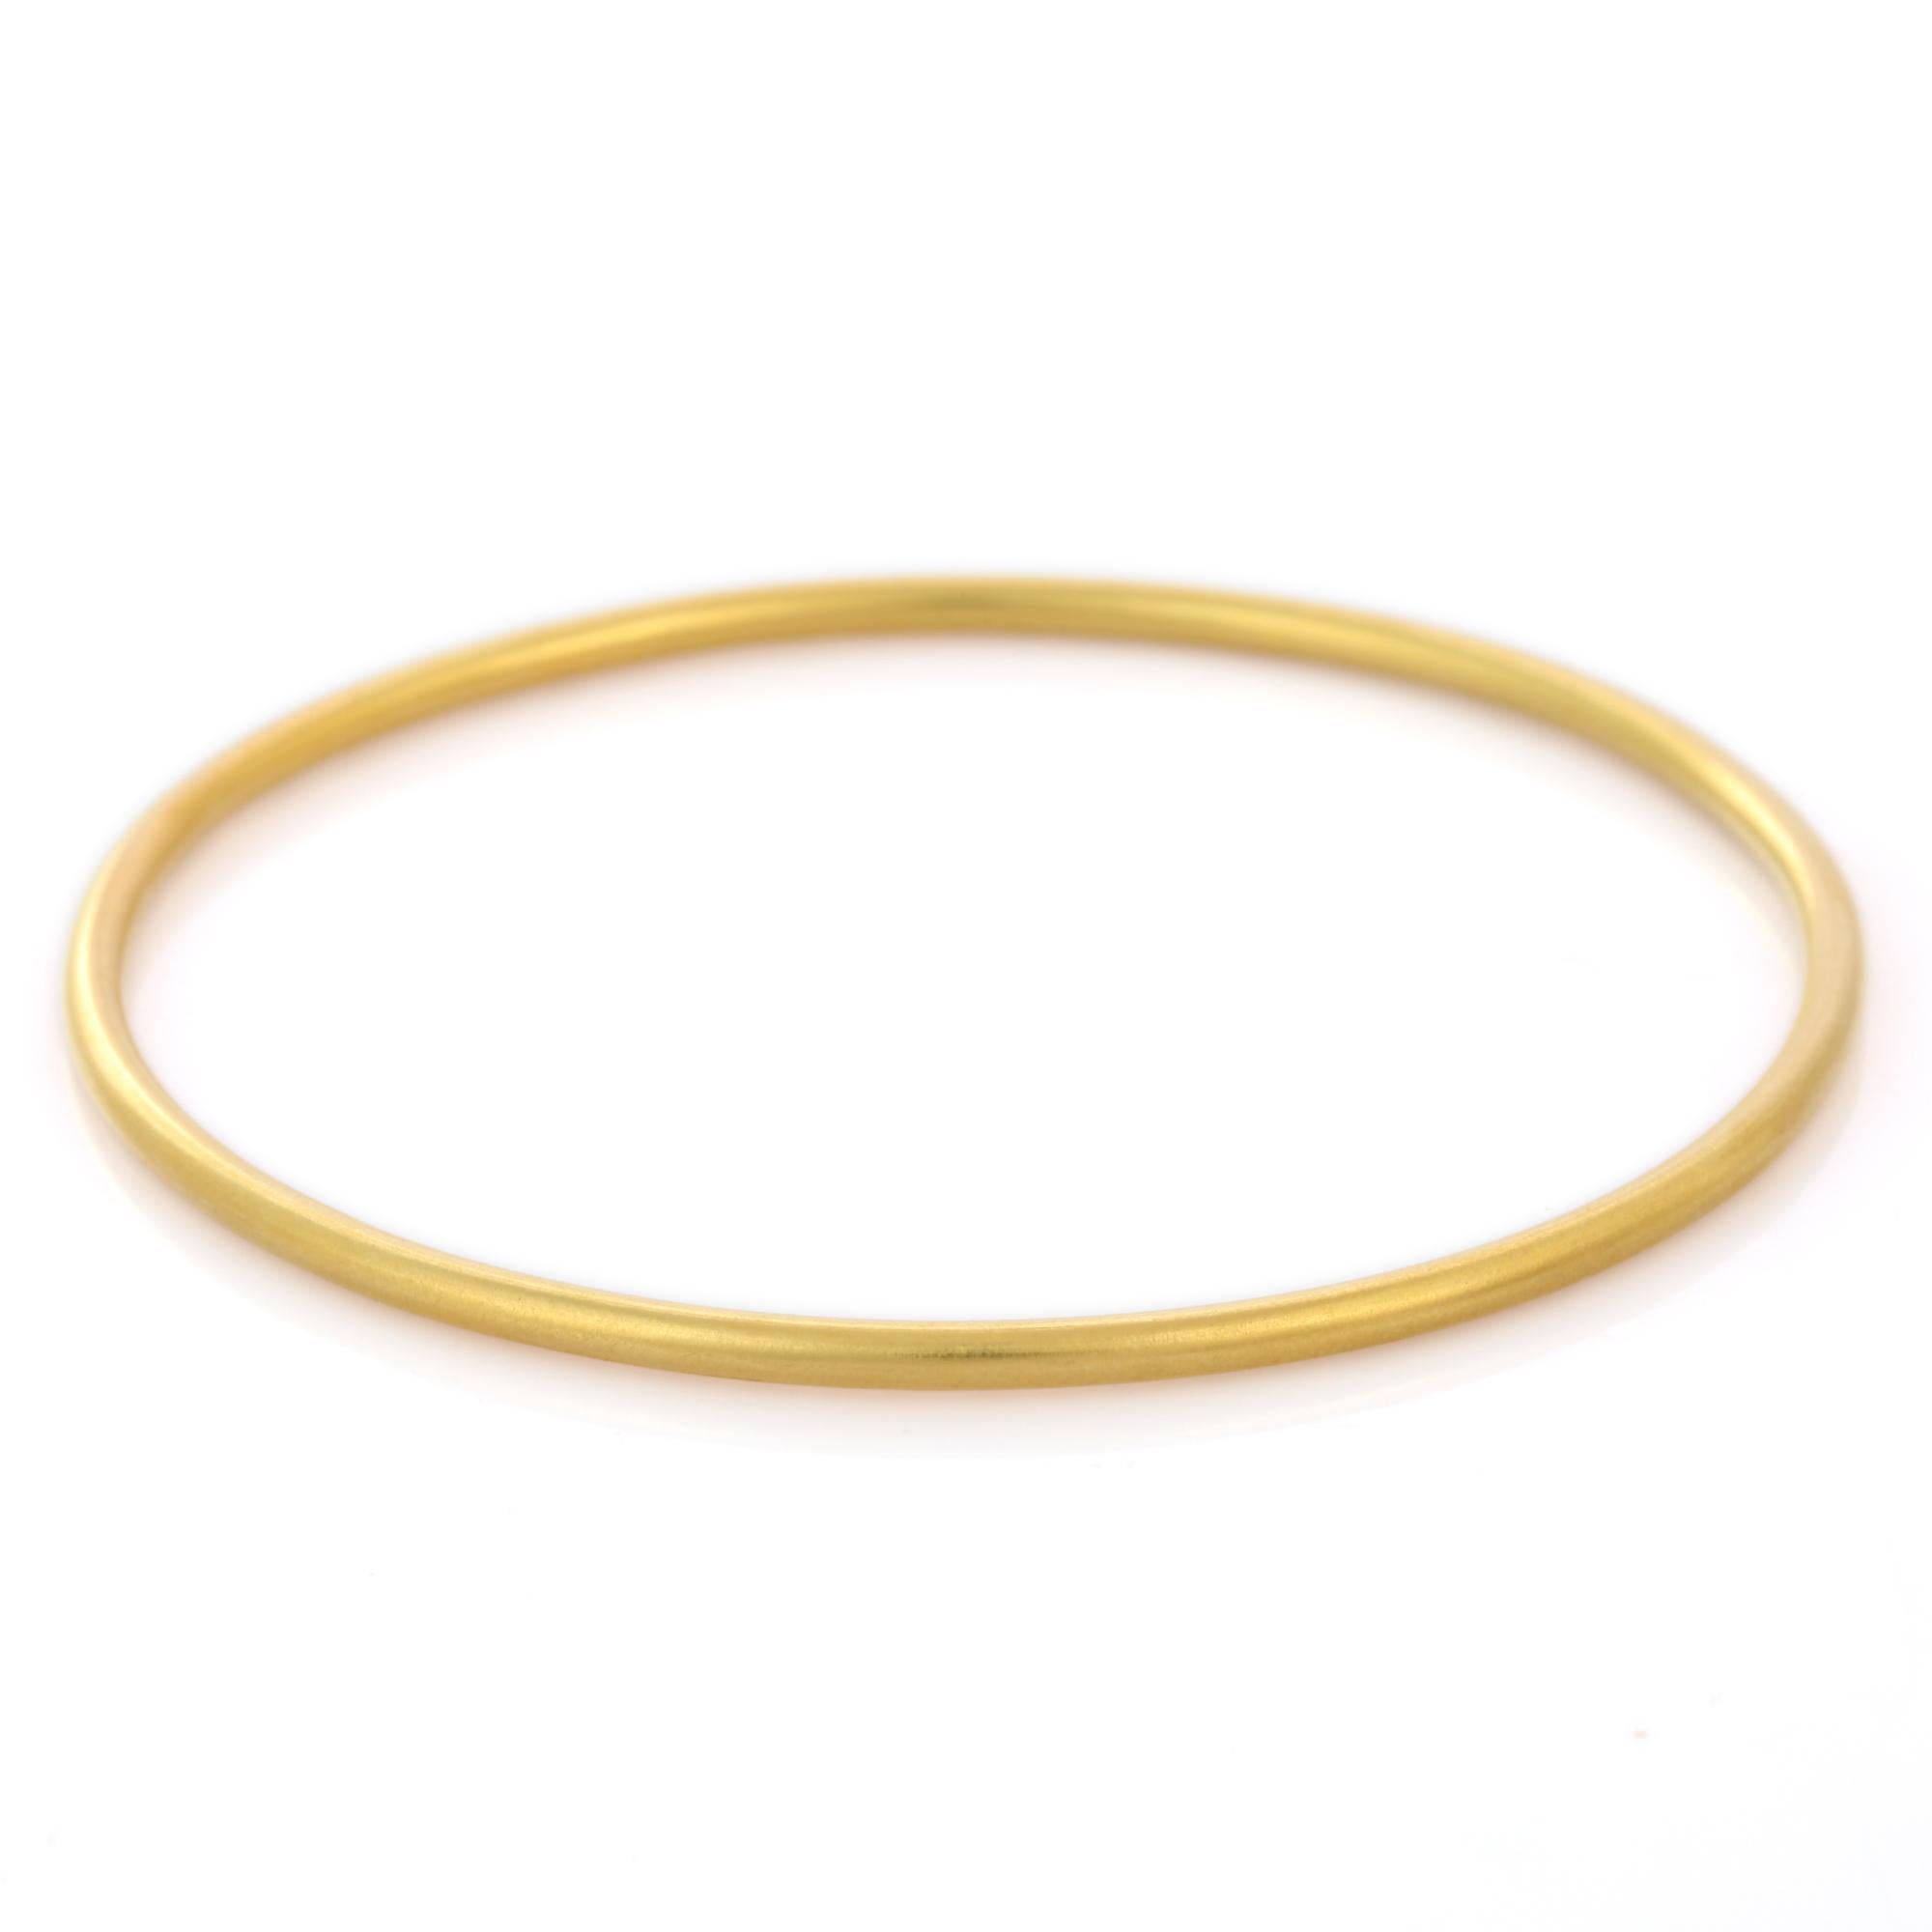 Anglo style Bangle in 18K Gold. It’s a great jewelry ornament to wear on occasions and at the same time works as a wonderful gift for your loved ones. These lovely statement pieces are perfect generation jewelry to pass on.
Bangles feel comfortable